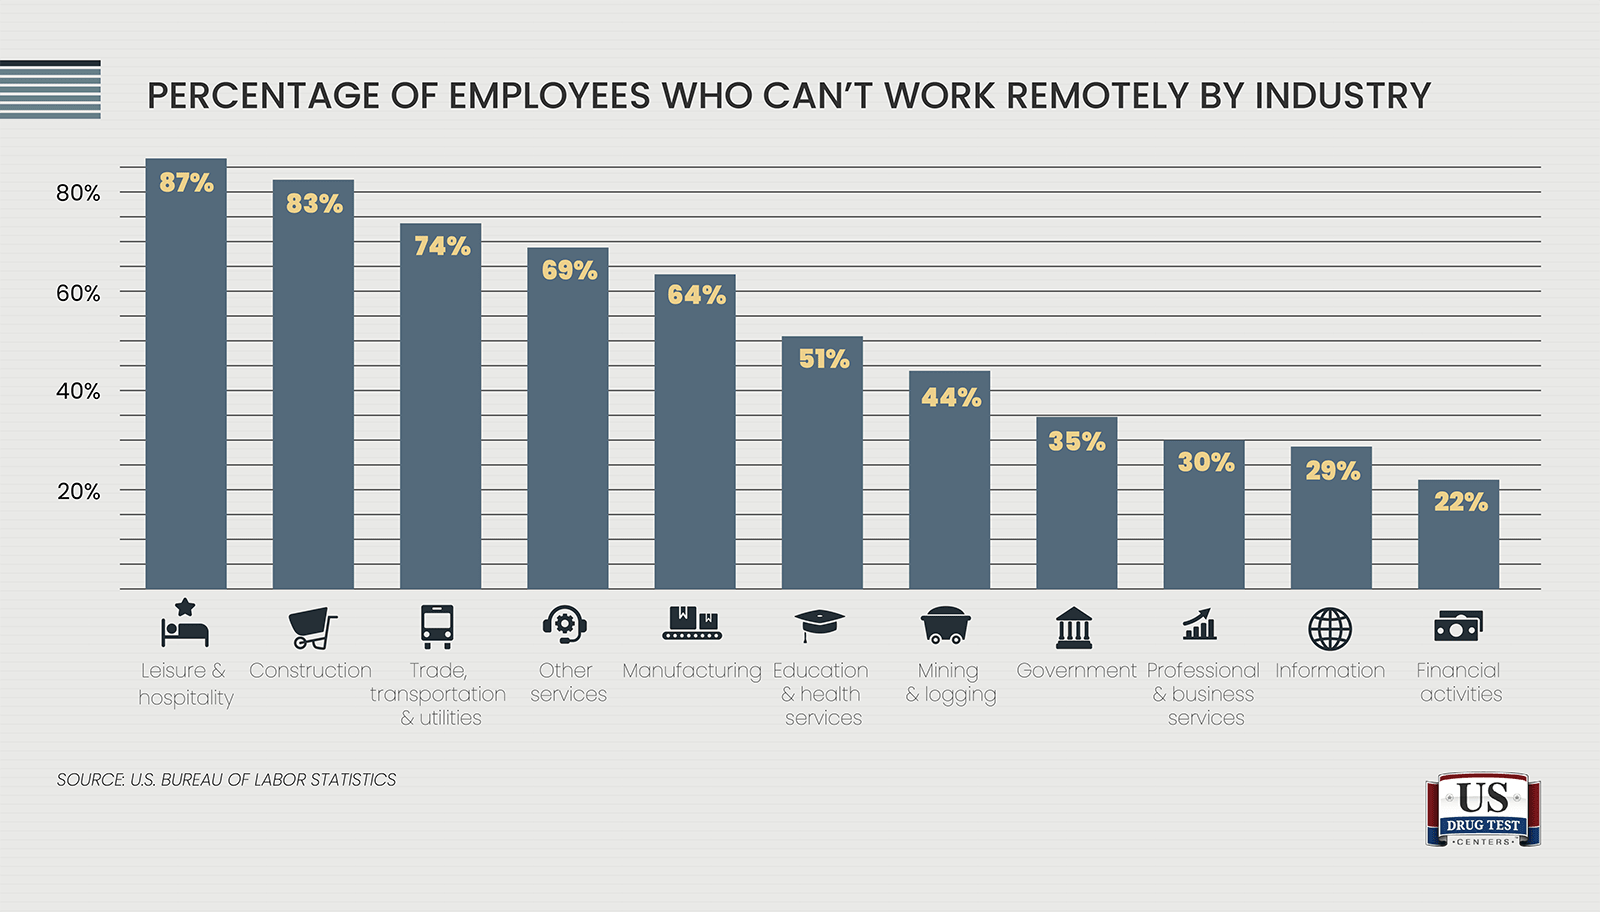 PERCENTAGE OF EMPLOYEES WHO CAN'T WORK REMOTELY BY INDUSTRY